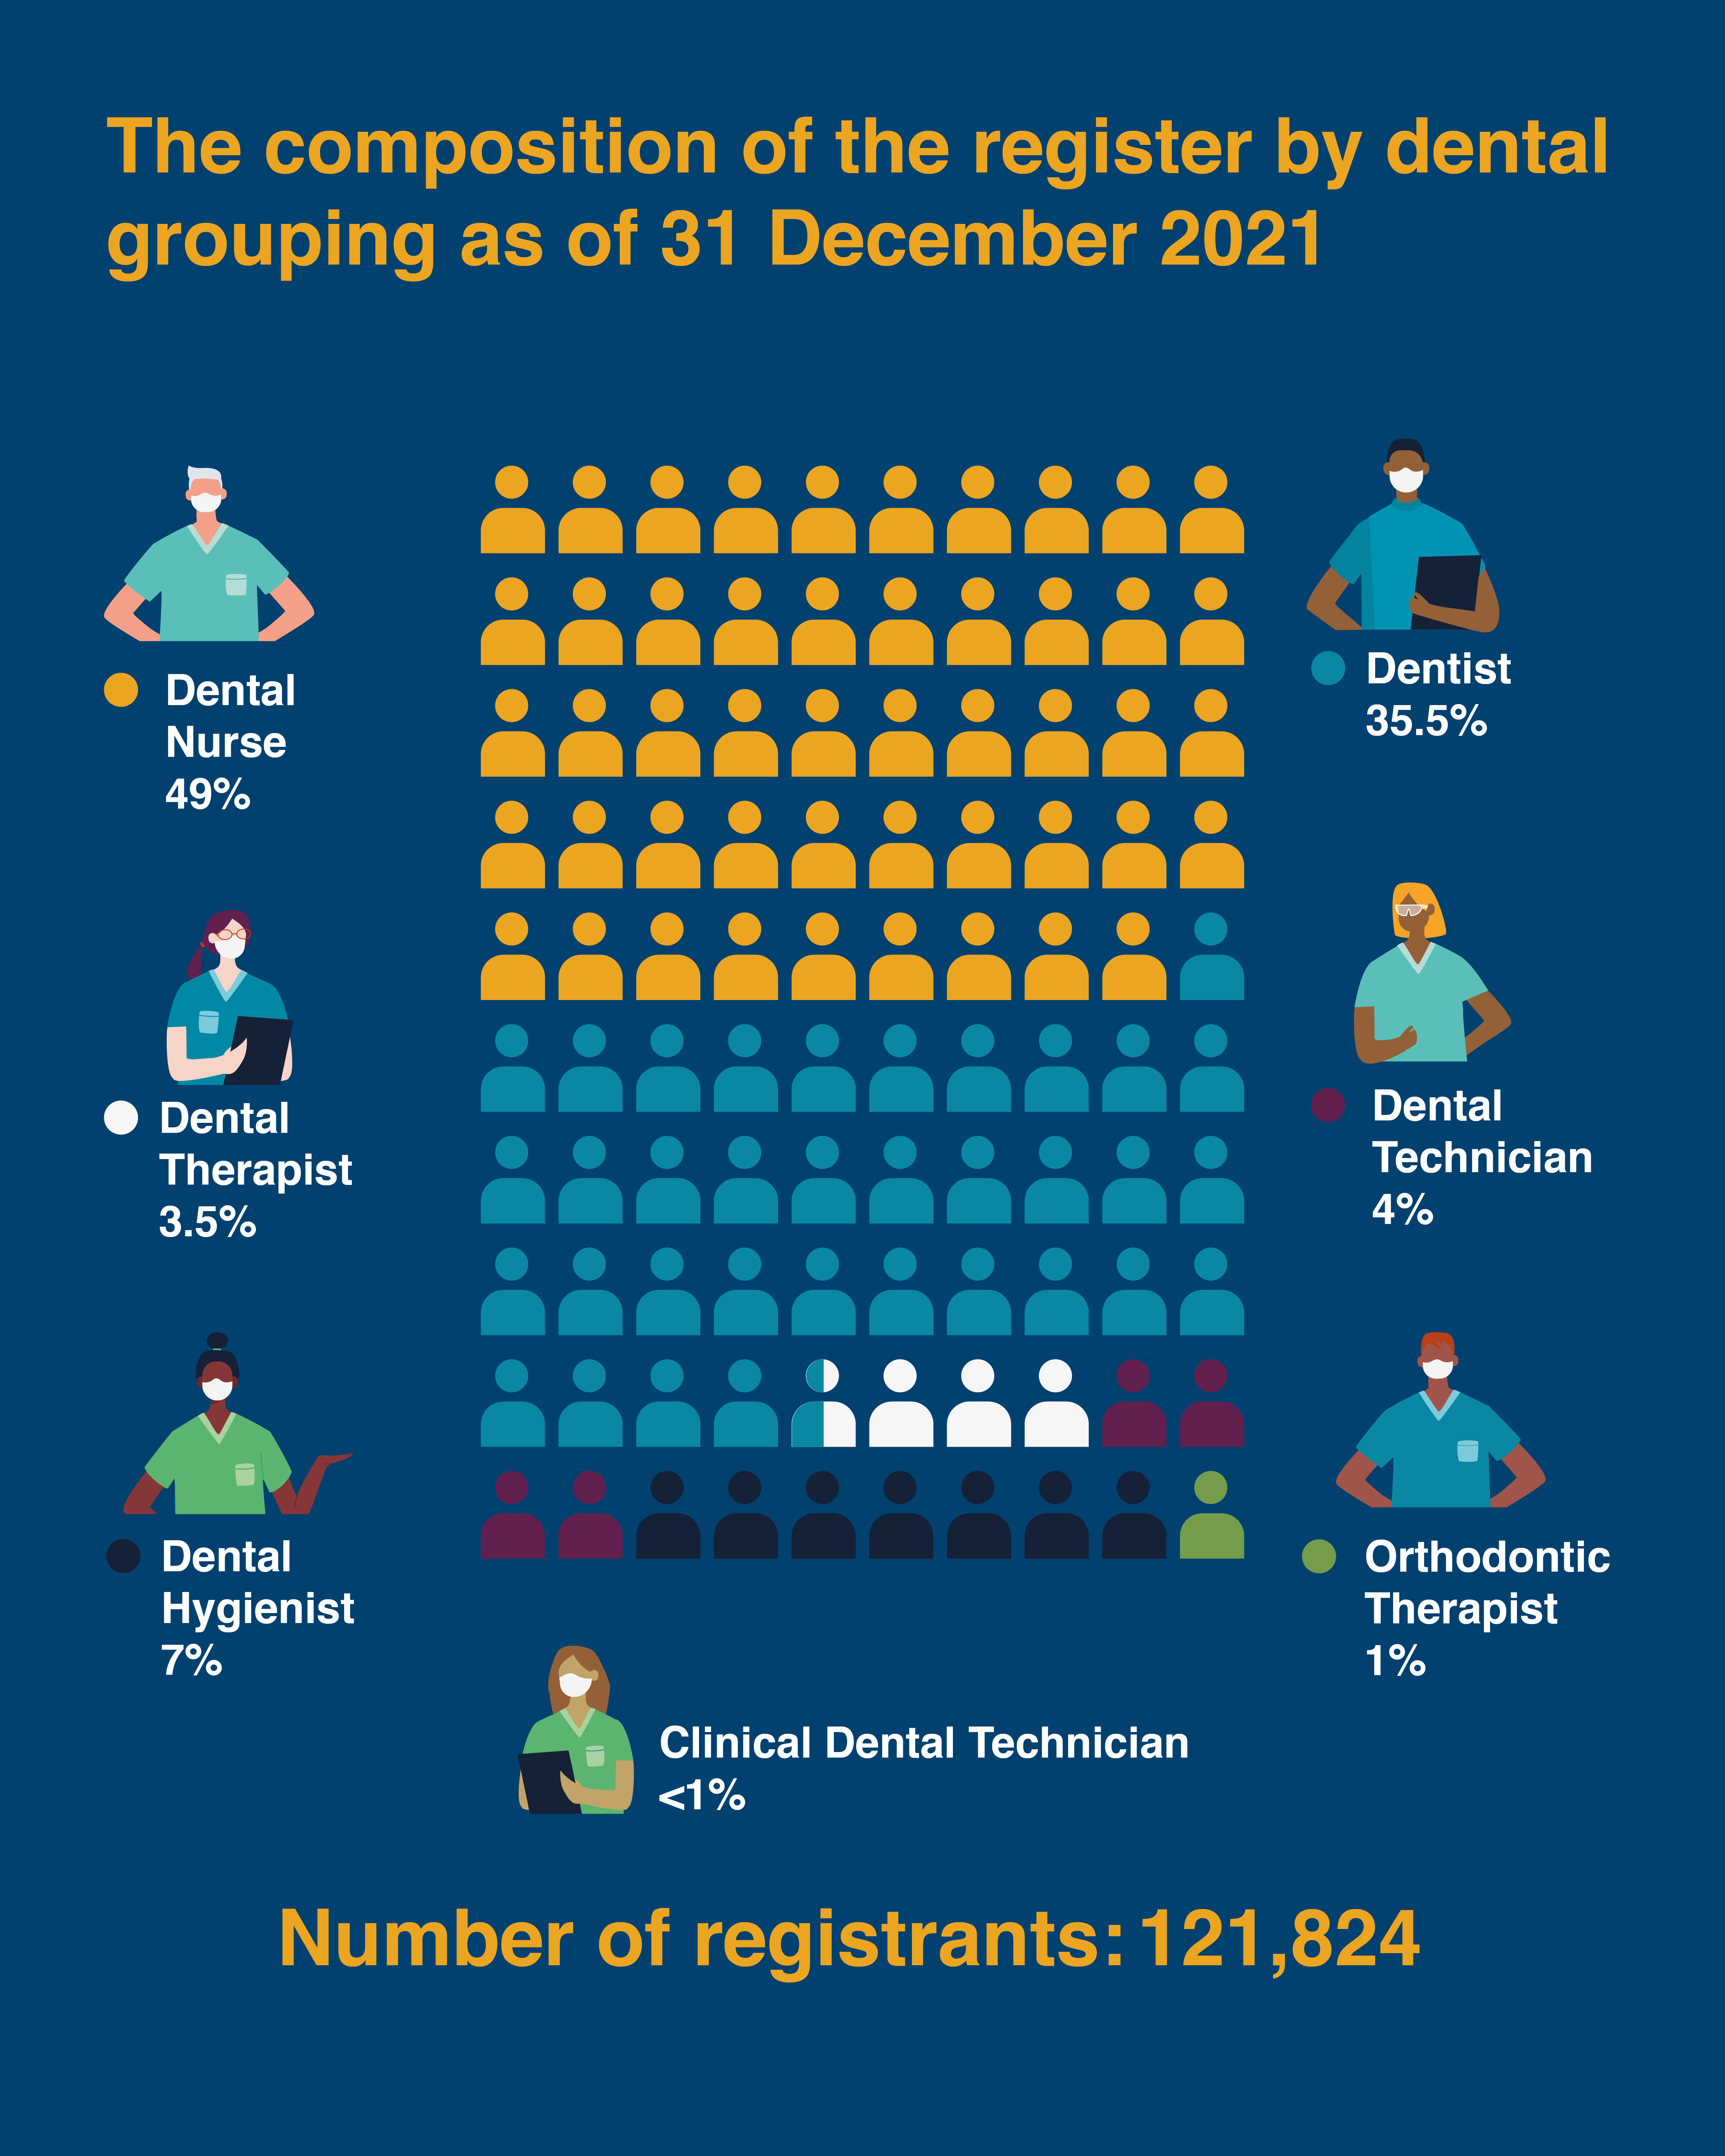 Illustration showing the composition of the register by dental grouping as of 31 December 2020